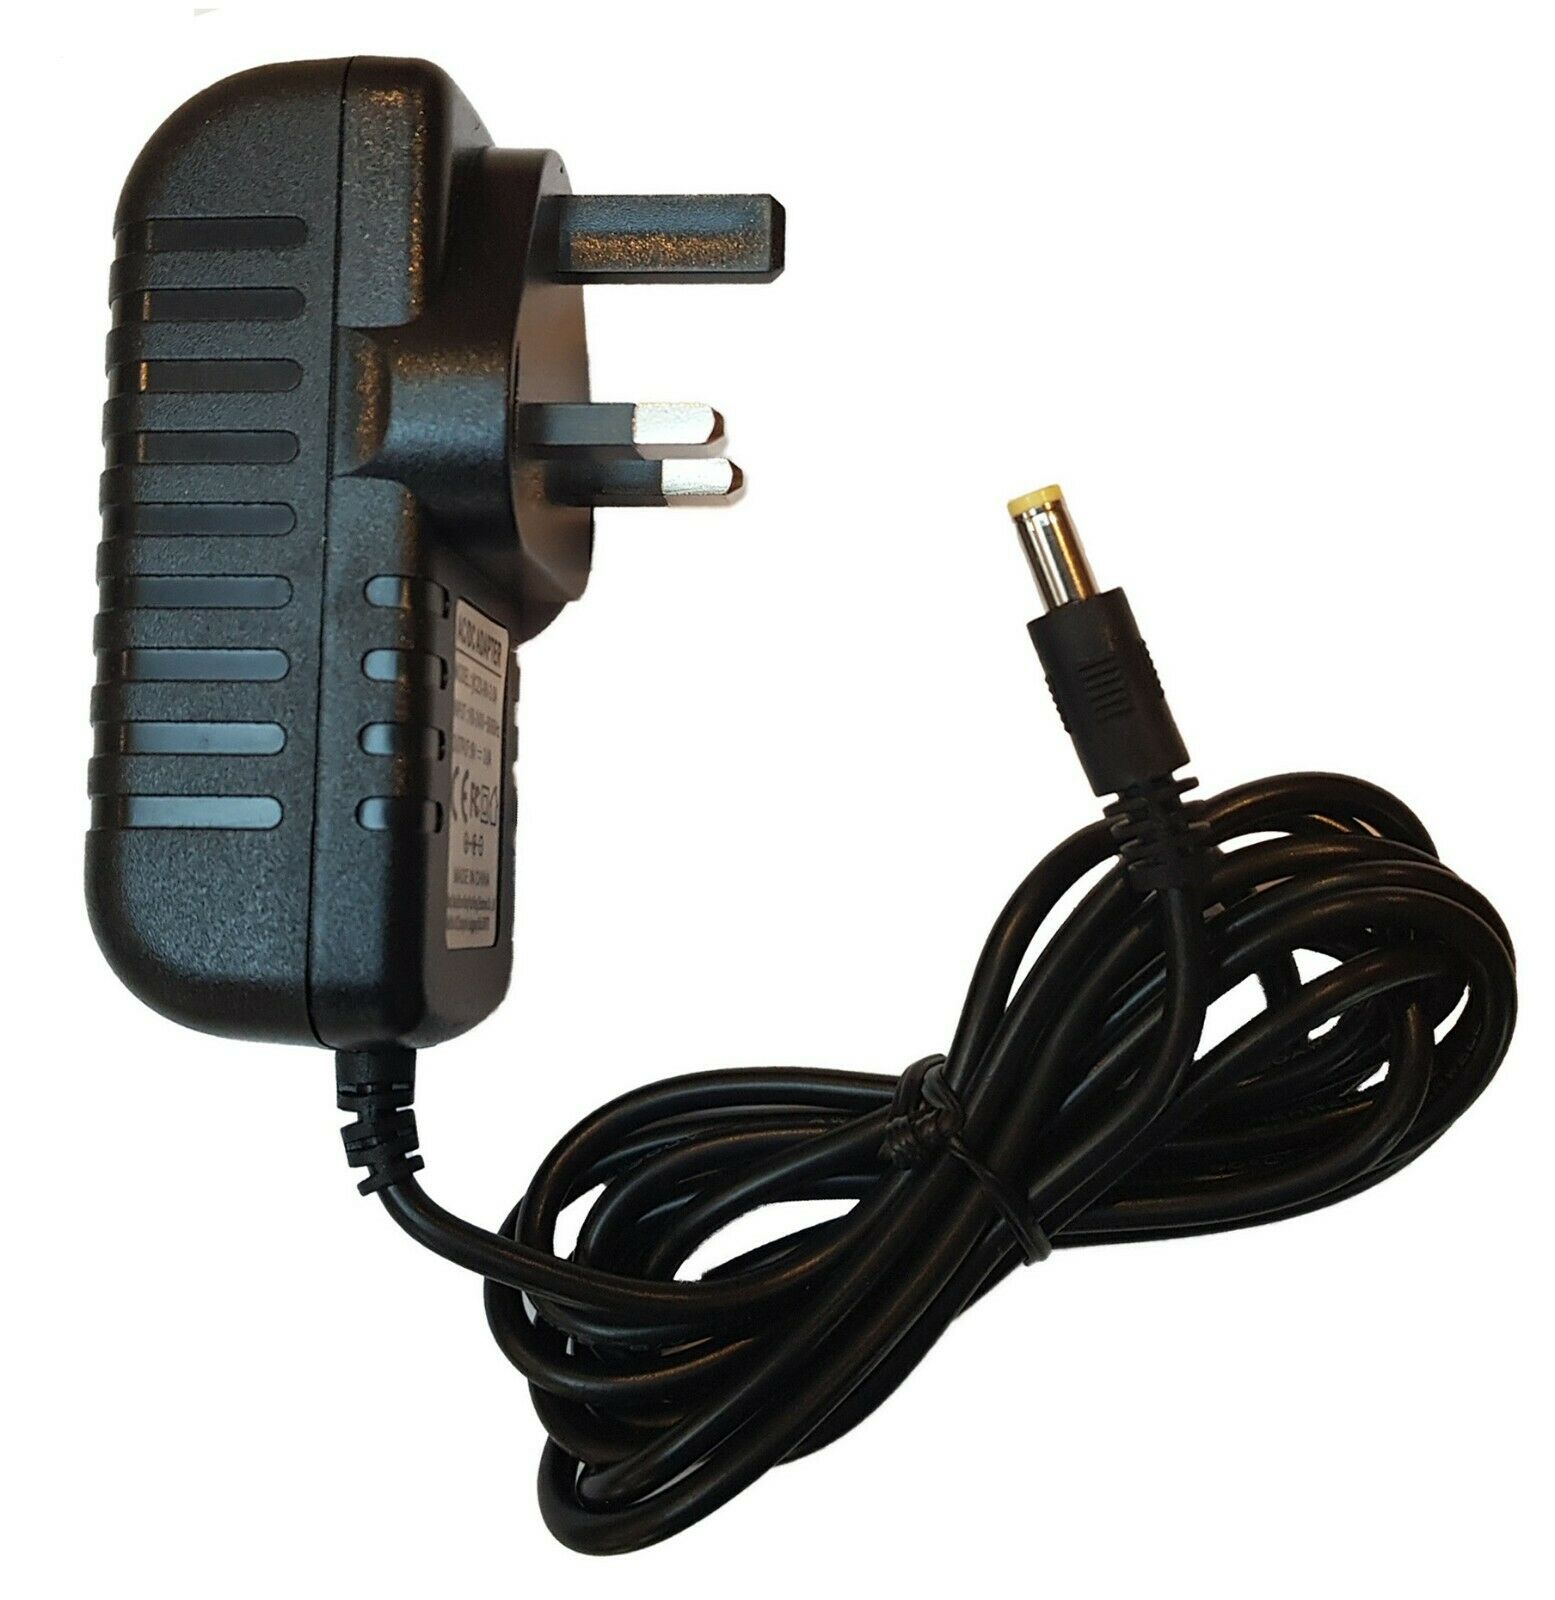 LINE 6 POD HD500X MULTI EFFECTS PEDAL 9V 3A POWER SUPPLY ADAPTER REPLACEMENT UK This listing is for a replacement powe